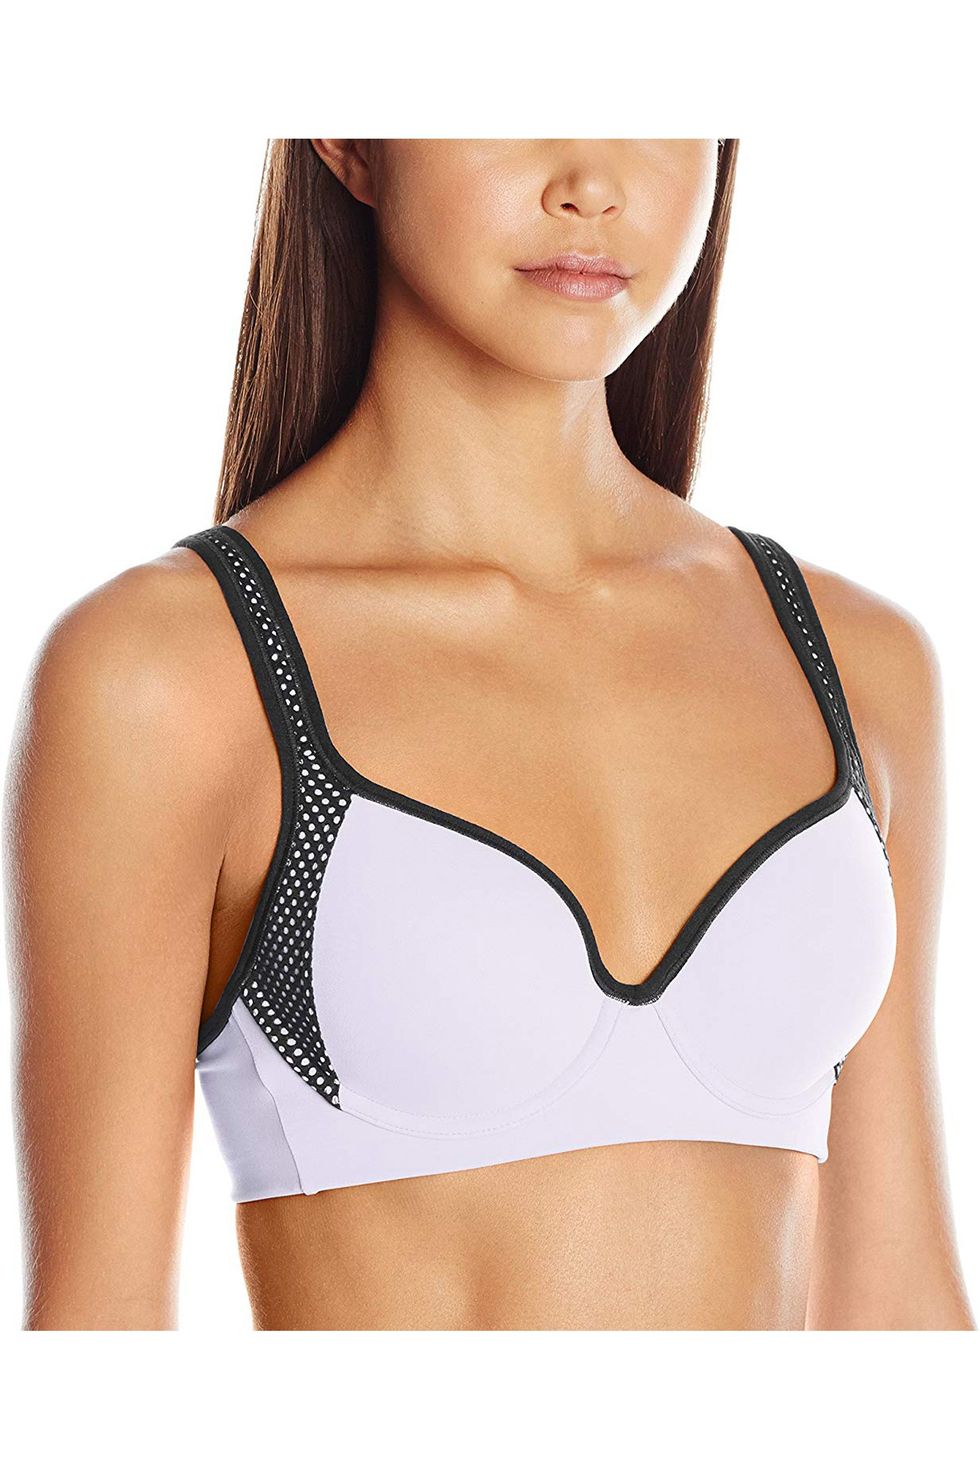 Stay comfortable and supported with the Maidenform Women's Sport Bra